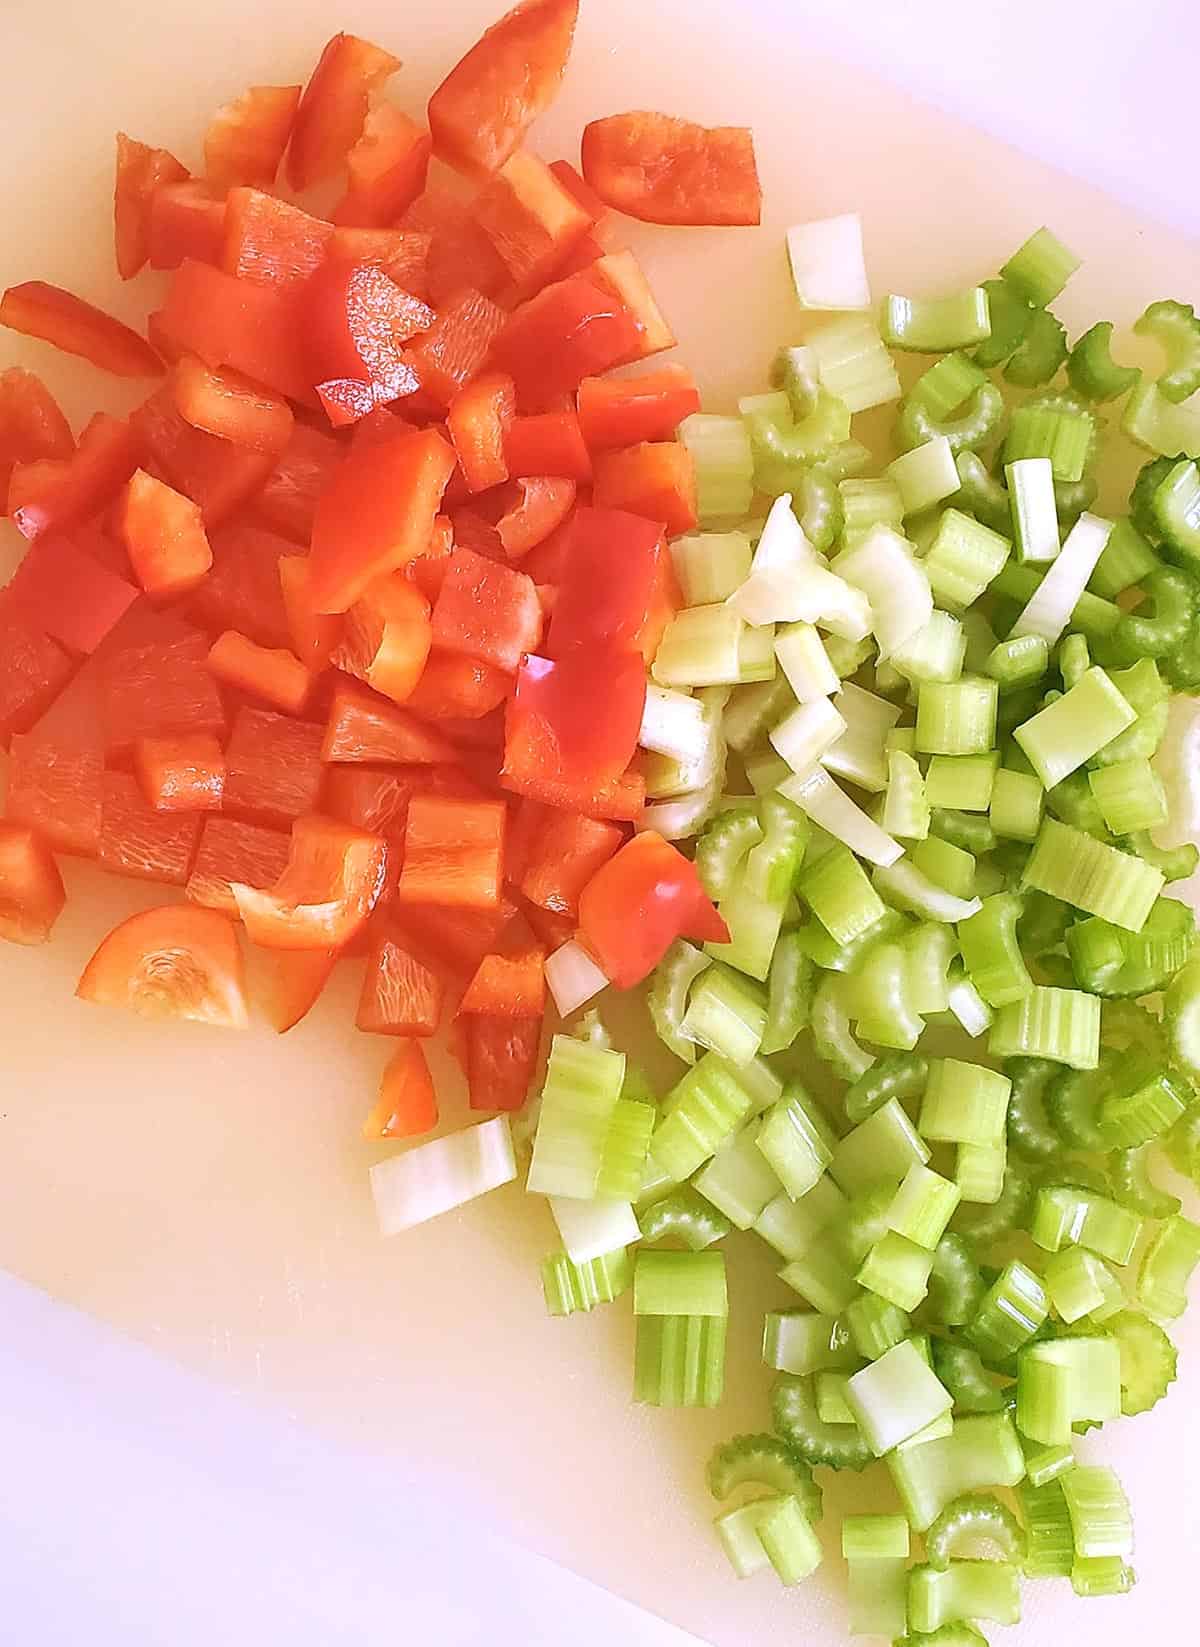 Chopped Celery and Bell Peppers